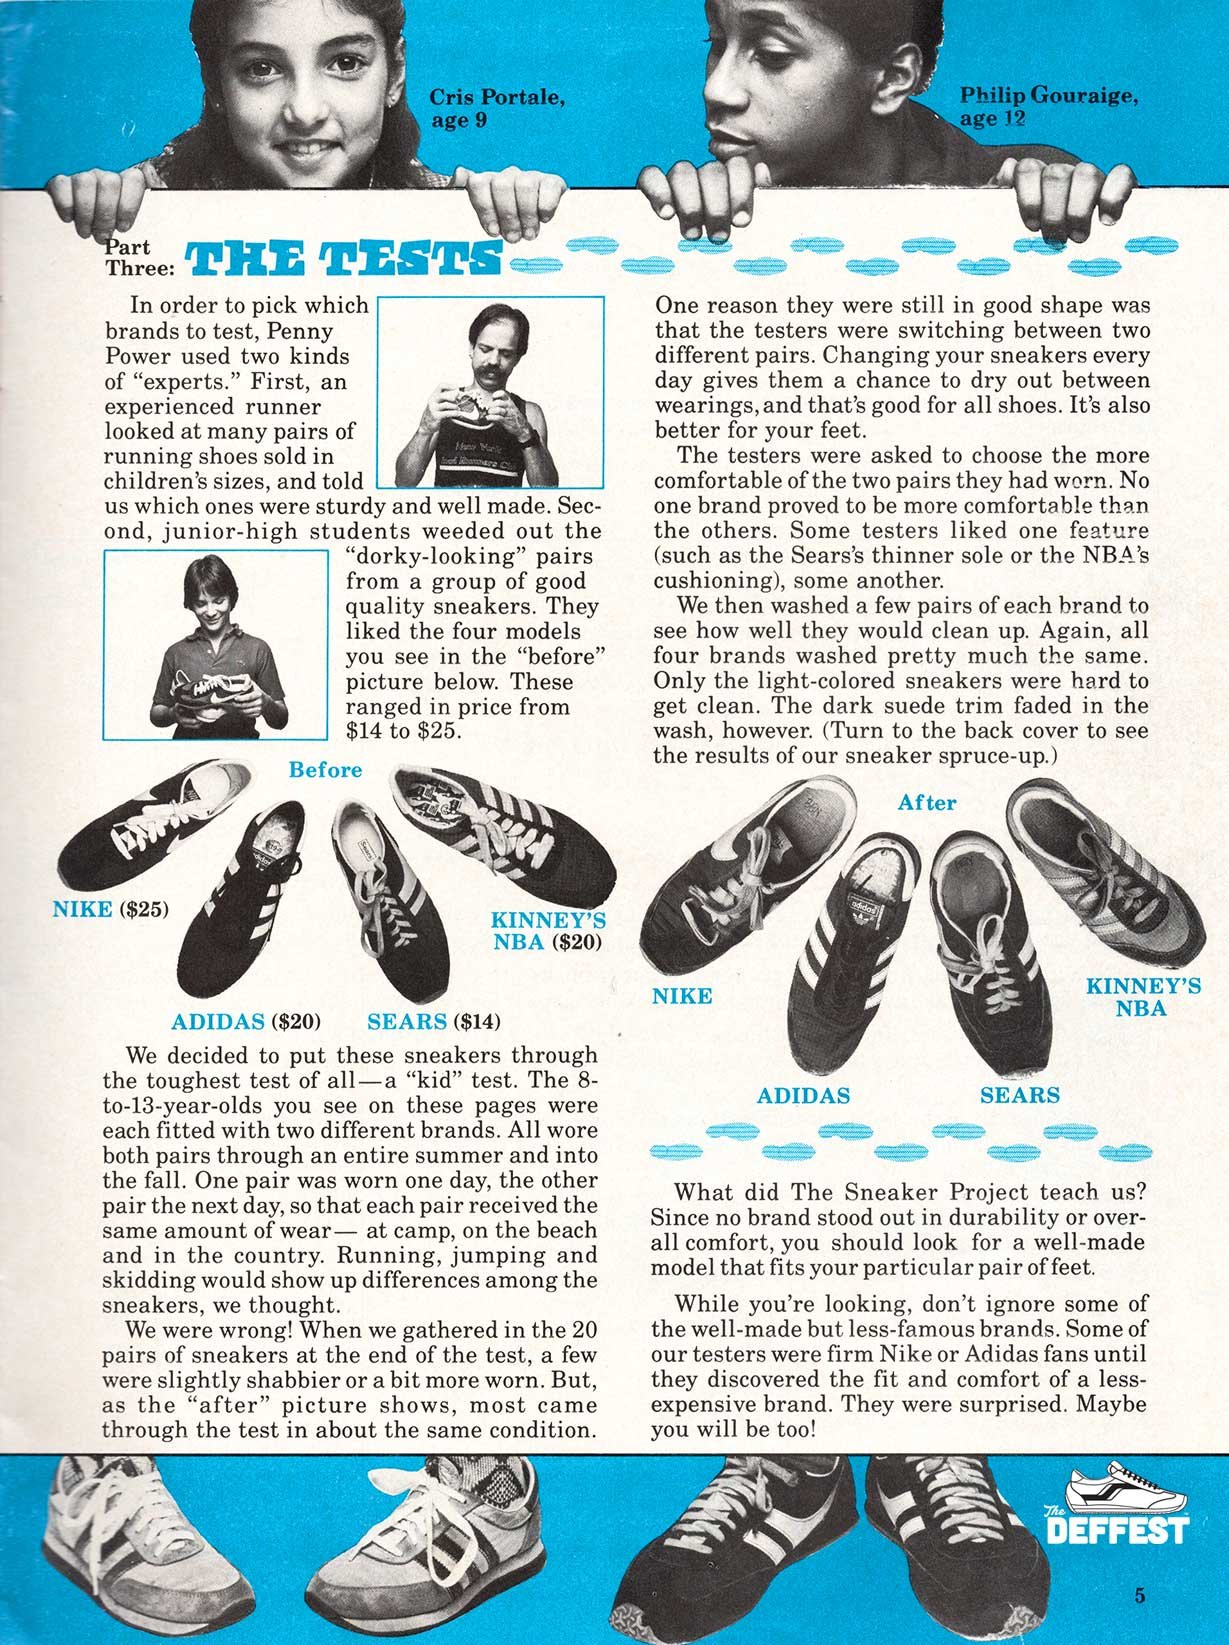 Penny Power Vintage April-May 1983 Consumer Reports 1983 Sneaker Testing magazine